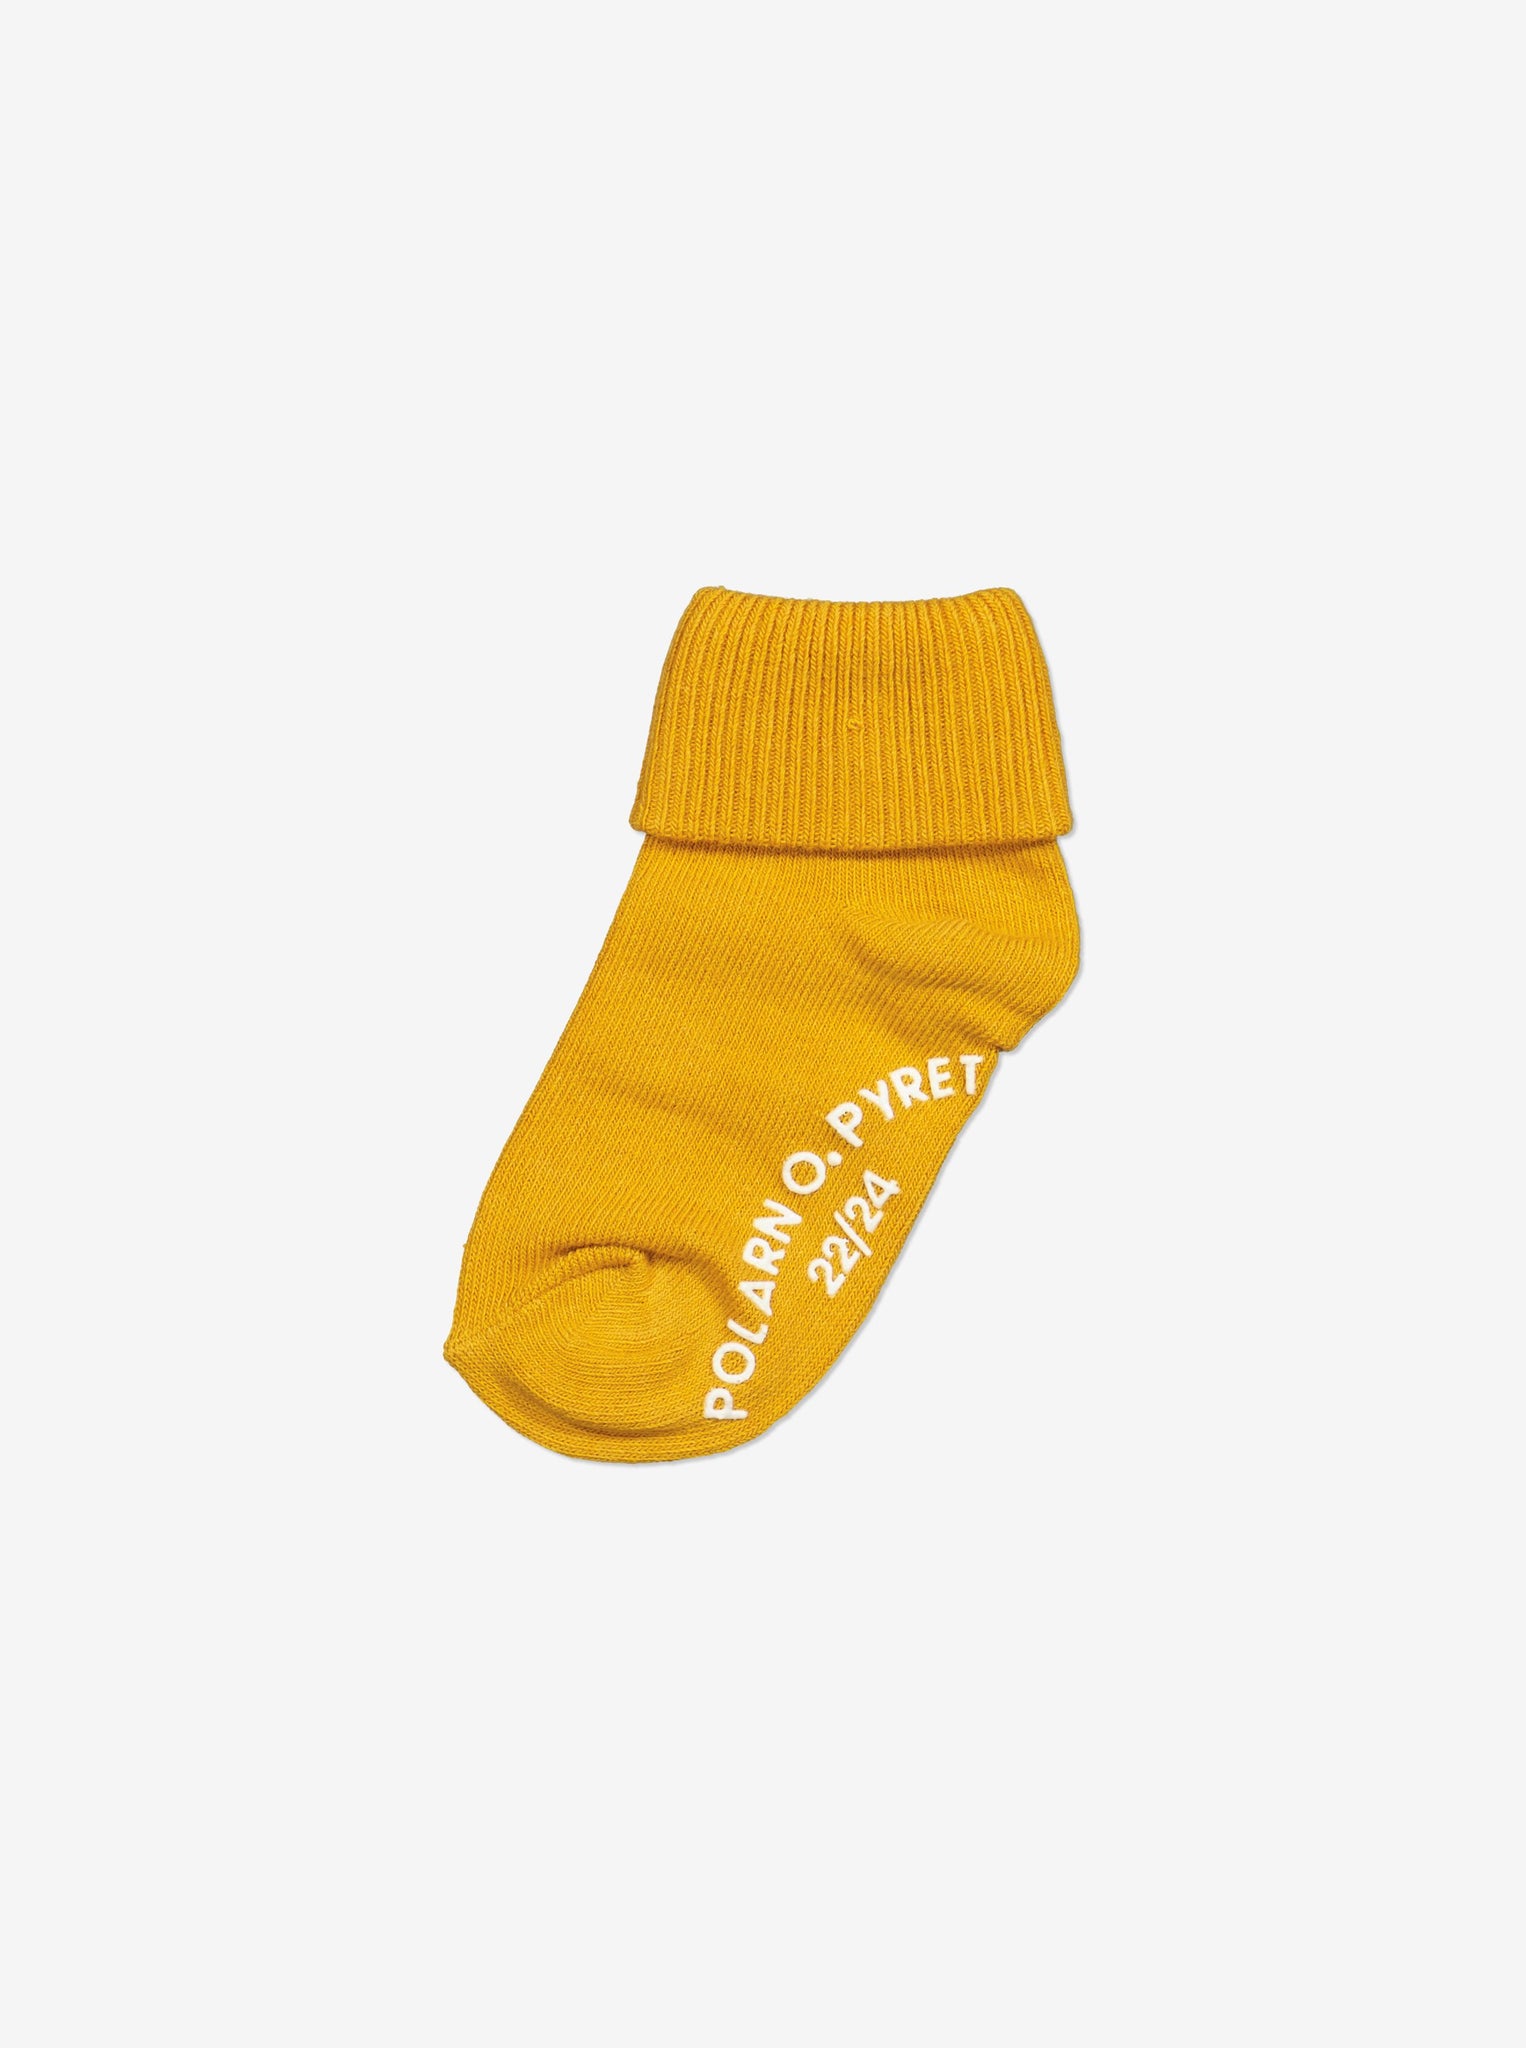  Organic Yellow Antislip Kids Socks Multipack from Polarn O. Pyret Kidswear. Made from ethically sourced materials.